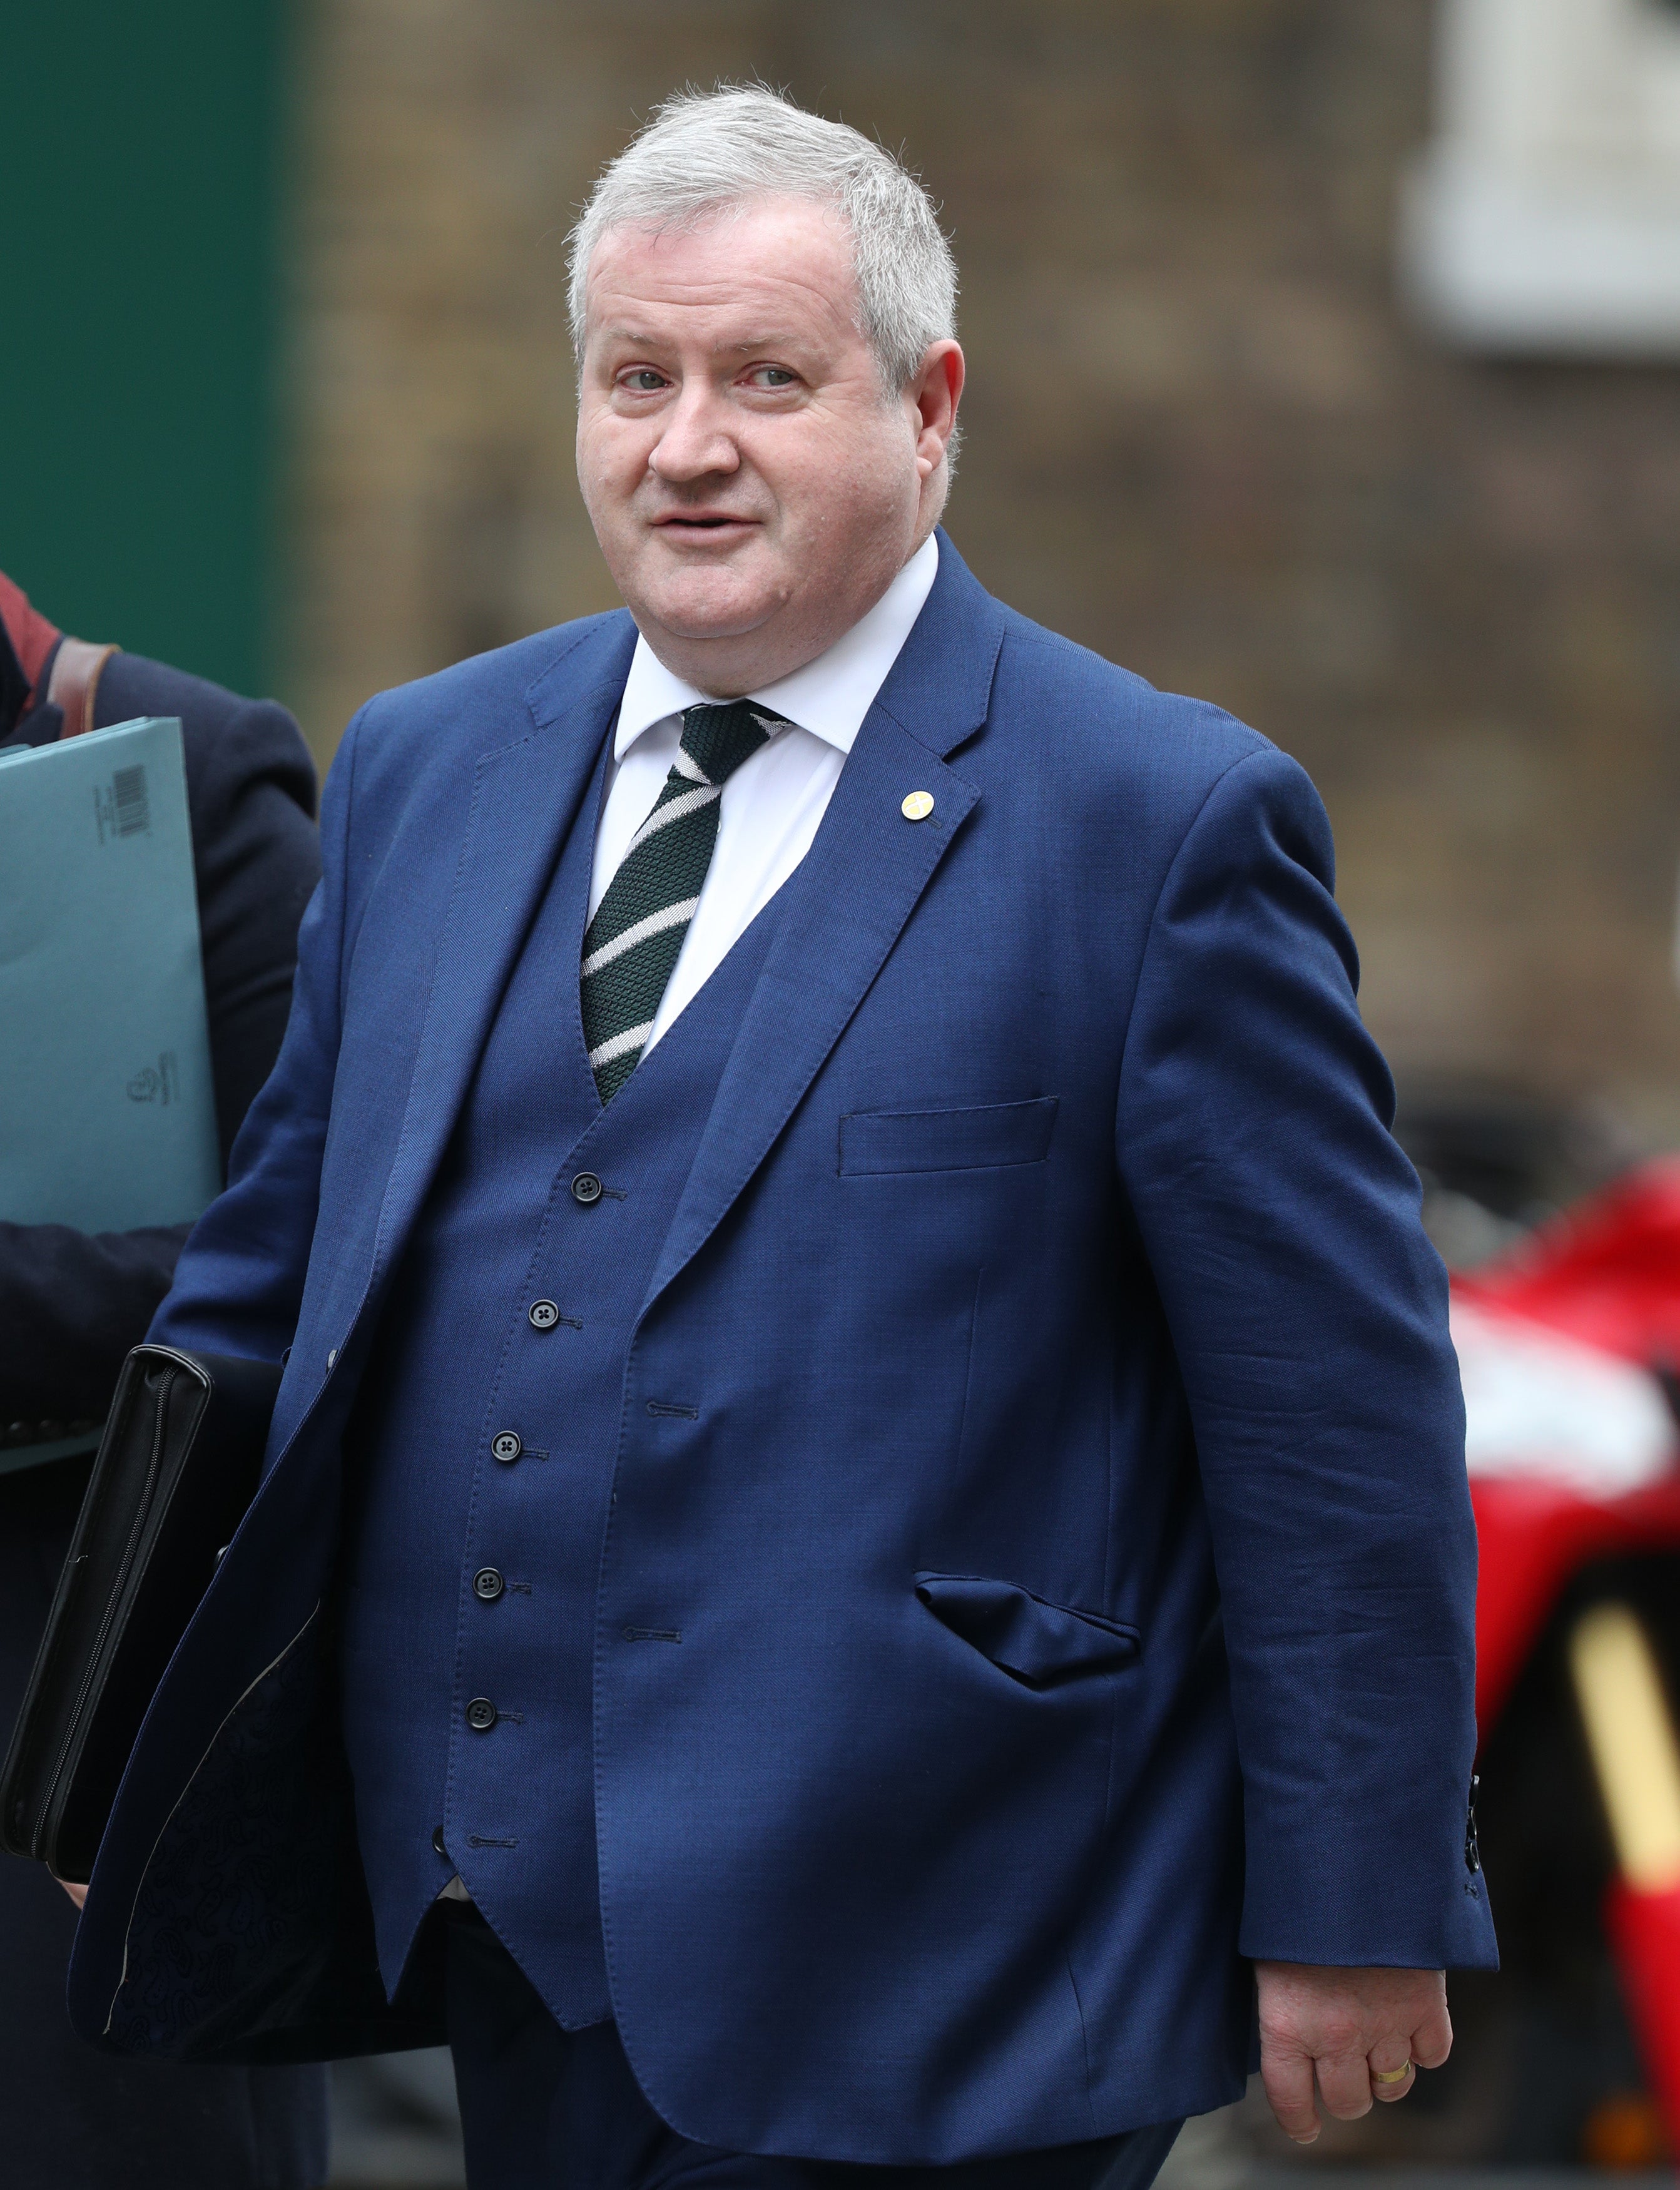 Ian Blackford has come in for criticism in the wake of the investigation (Yui Mok/PA)